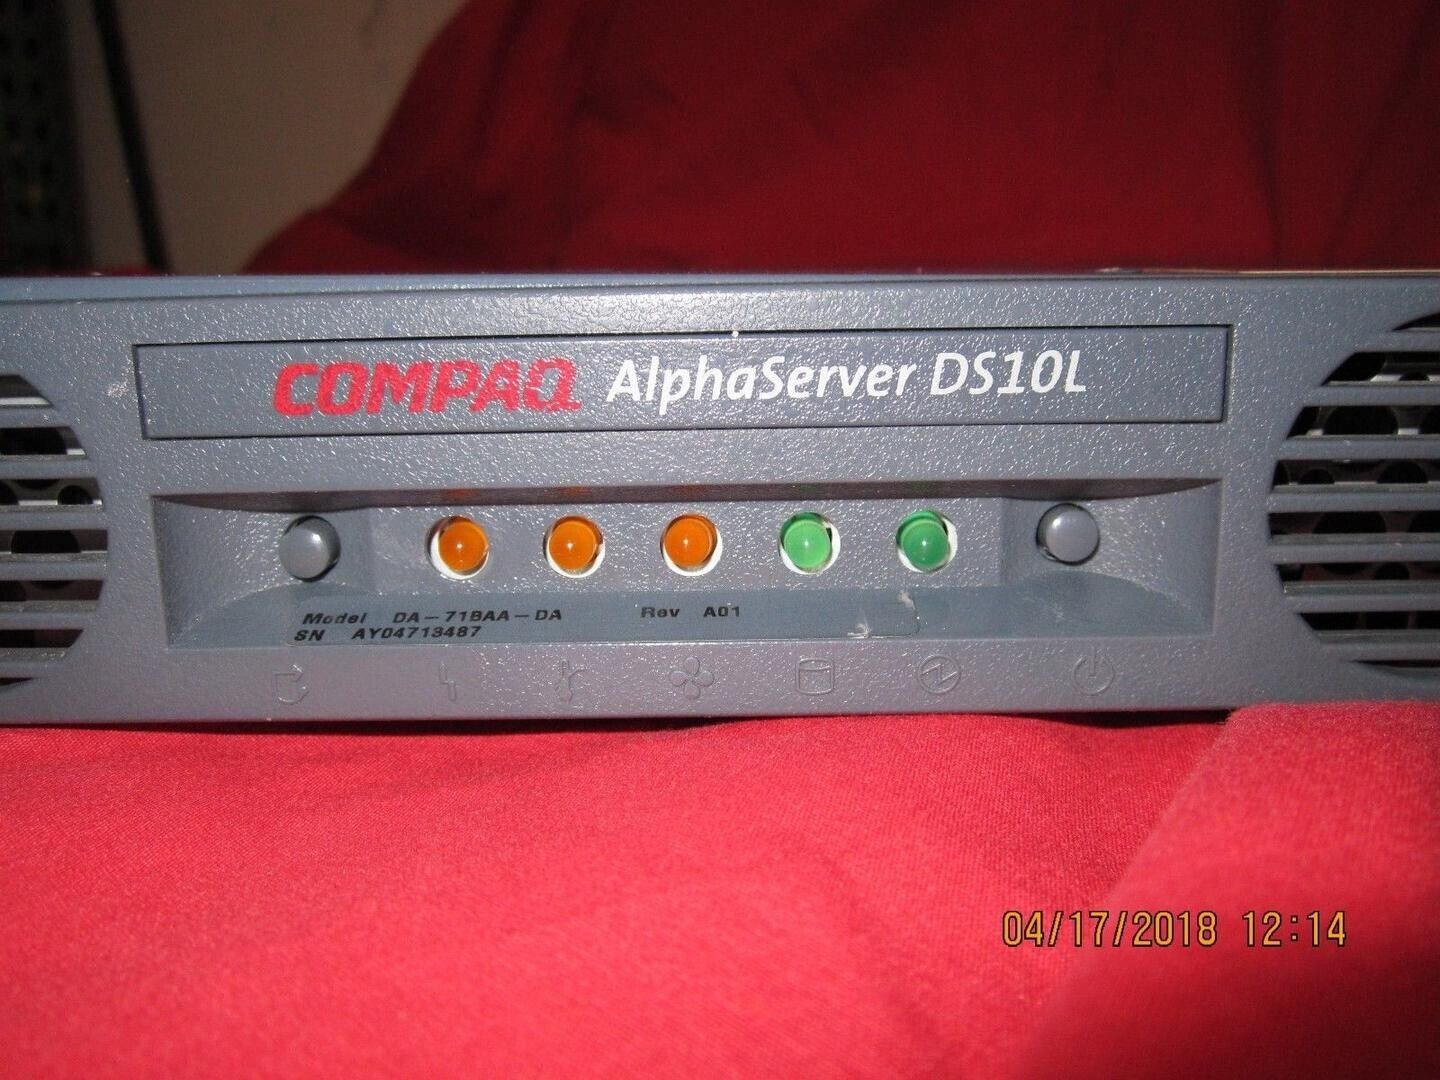 Compaq AlphaServer DS10L OPENVMS 8.4 Installed. Working condition